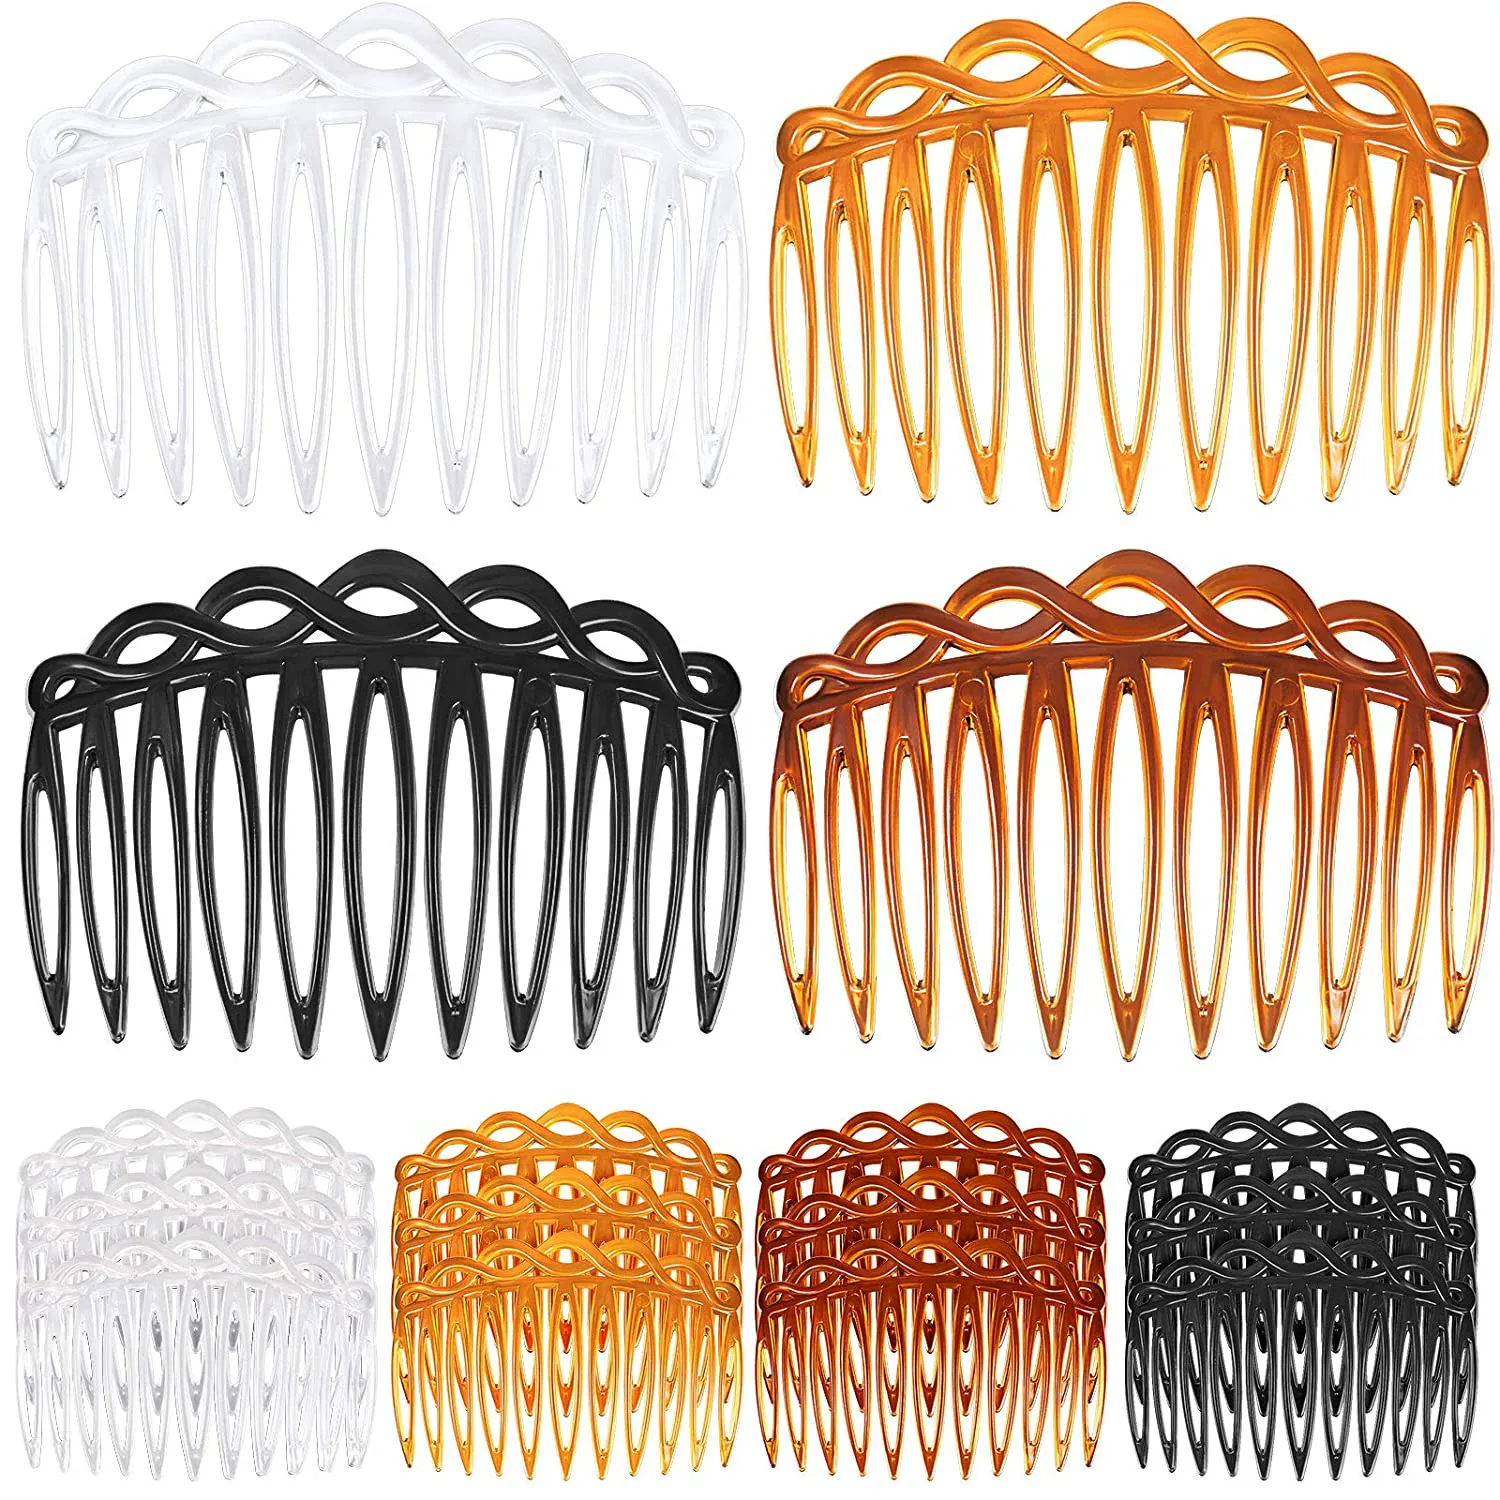 1 Pcs 7.5cm 4 Colors New Classic Retro Woven Hair Comb For Daily Hair Accessories Hair Styling Tools нож victorinox classic sd colors tasty grape 0 6223 52g пурпурный 7 функций 58мм